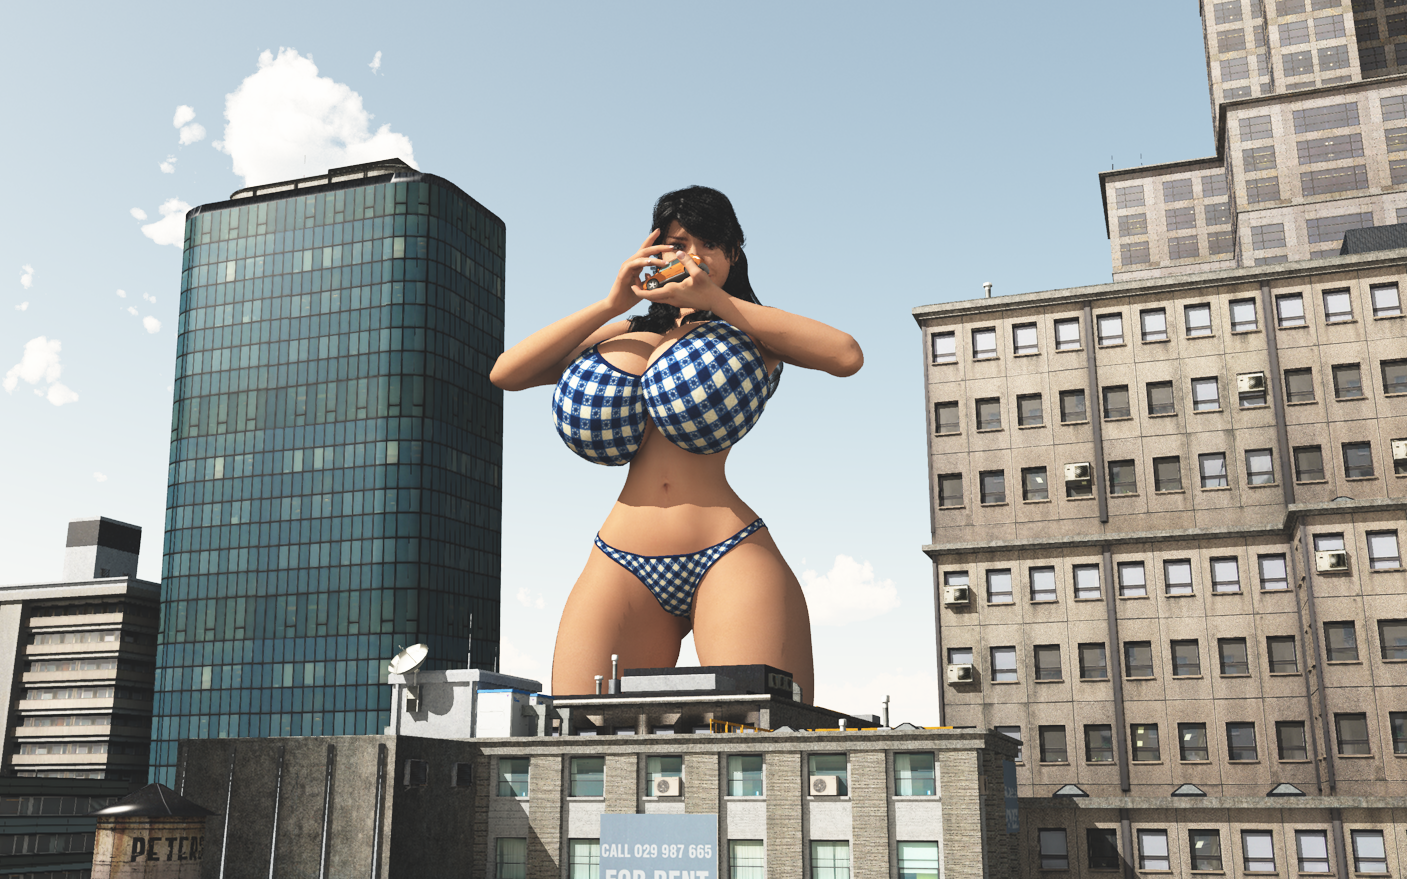 Vue Giantess 62 This Car Seems Quite Frail By Nyom87 On DeviantArt.